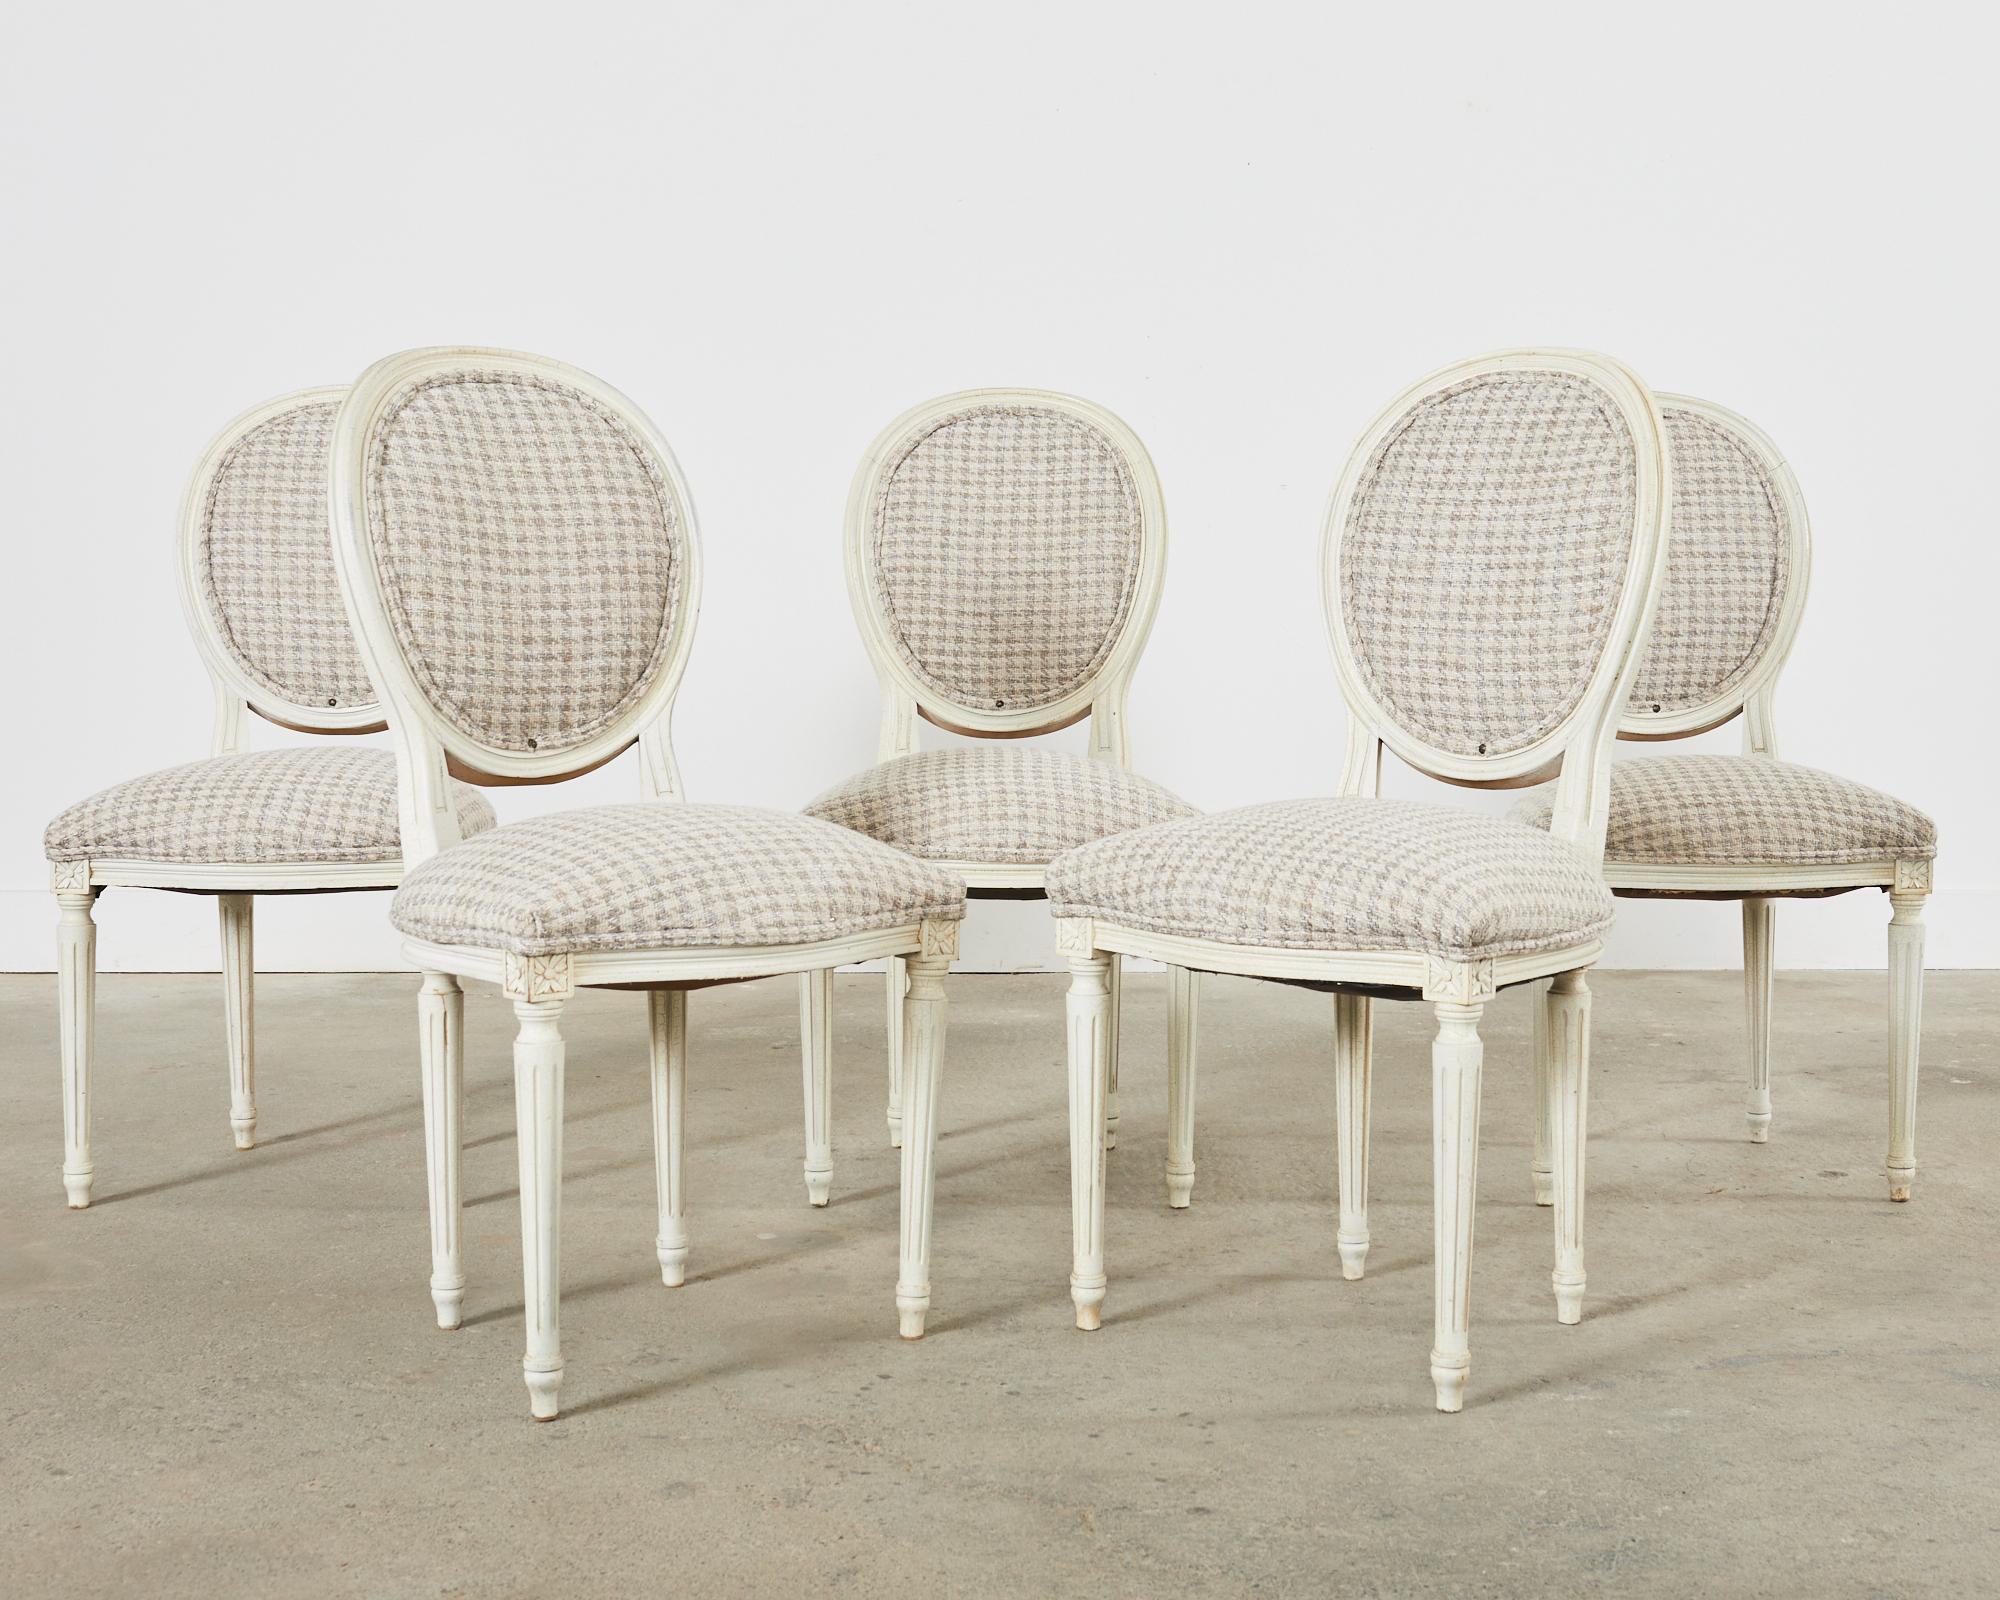 Set of Five Louis XVI Style Painted Dining Chairs with Houndstooth In Good Condition For Sale In Rio Vista, CA